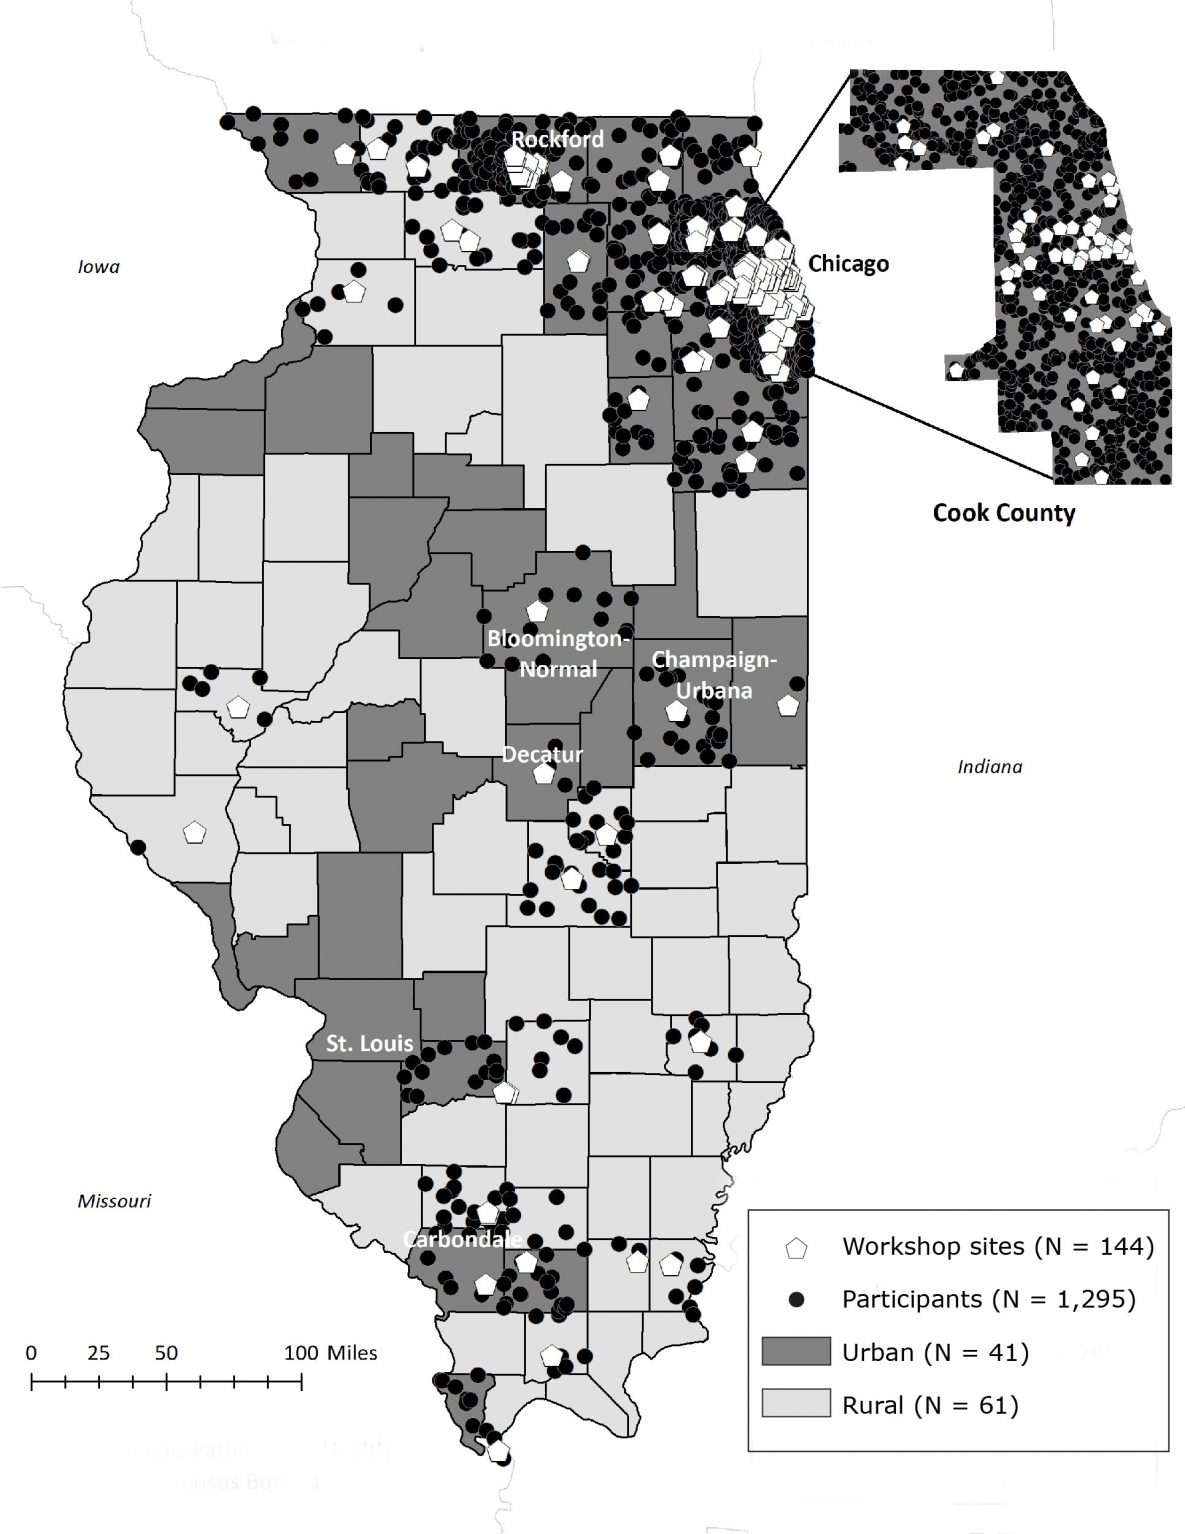 Location of workshop sites for the Chronic Disease Self-Management Program and the Diabetes Self-Management Program and distribution of participants’ home addresses by rural and urban counties in Illinois during 2016–2017. We used the dot-density function to indicate the correct number of participants per county while protecting information on participants’ exact residential locations. Data sources: Illinois Pathways to Health (19), US Census Bureau (20). 